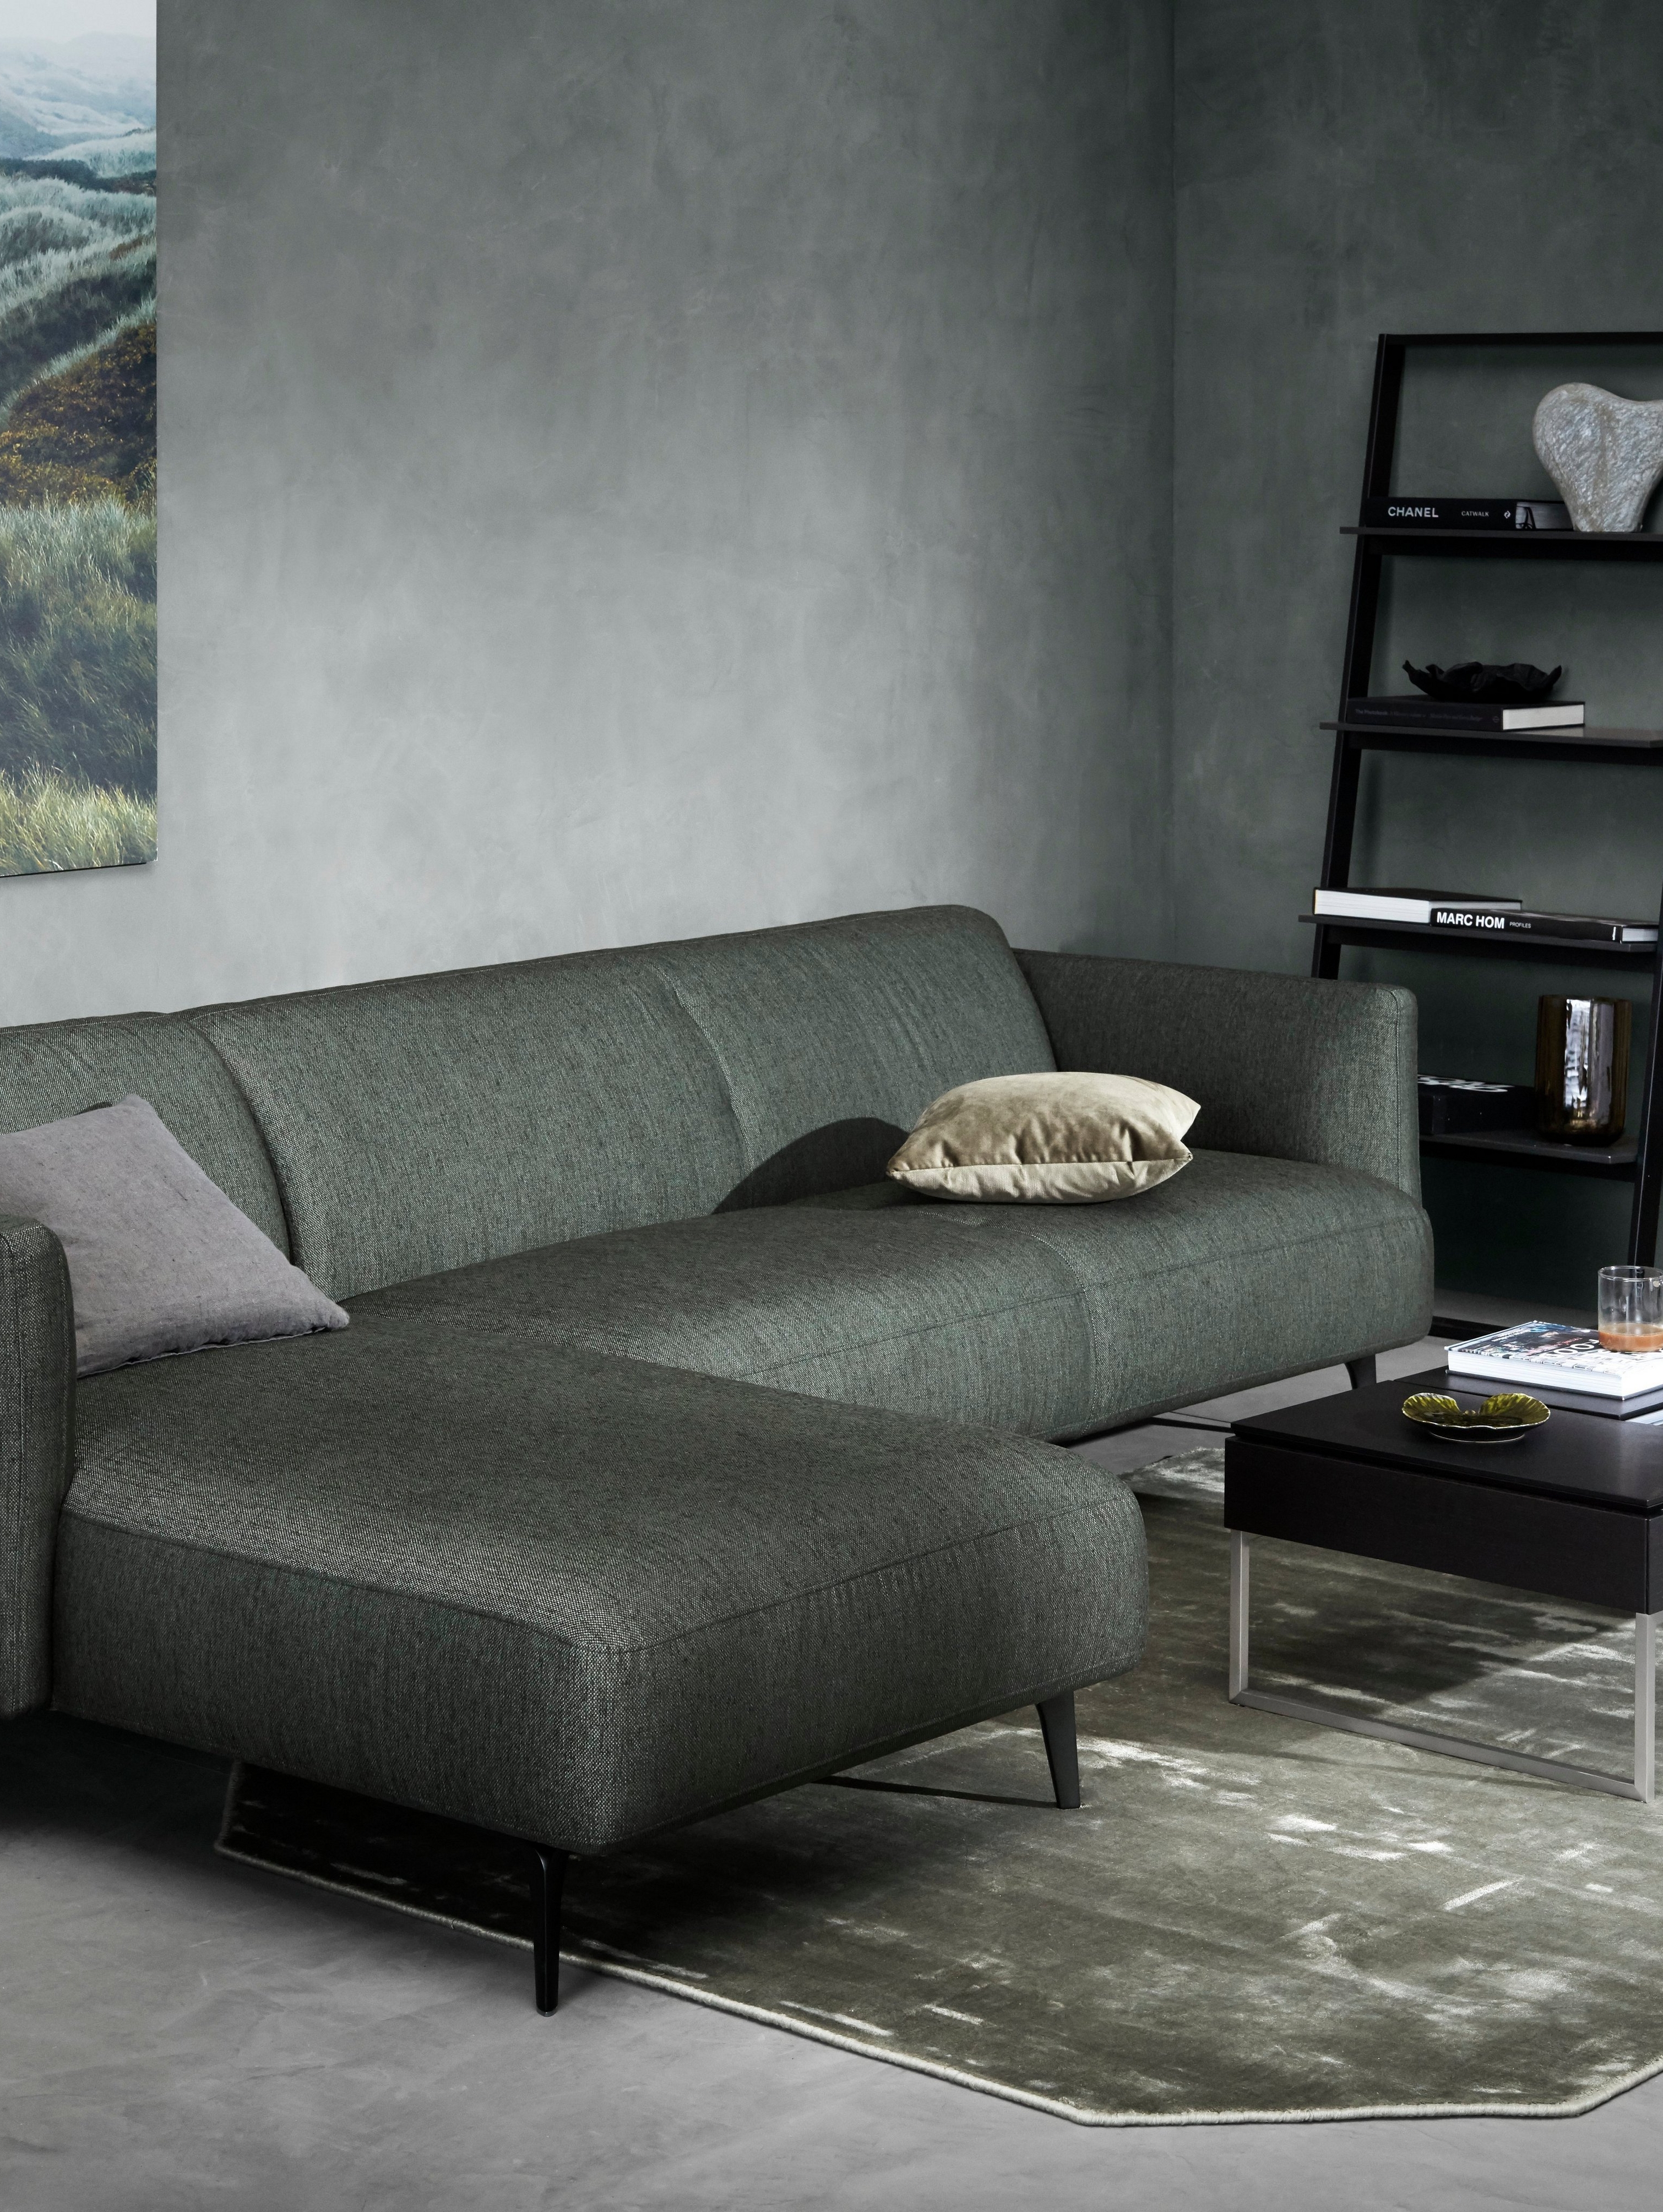 the Modena sofa with resting unit in a dark green Bristol inside a muted green painted room.